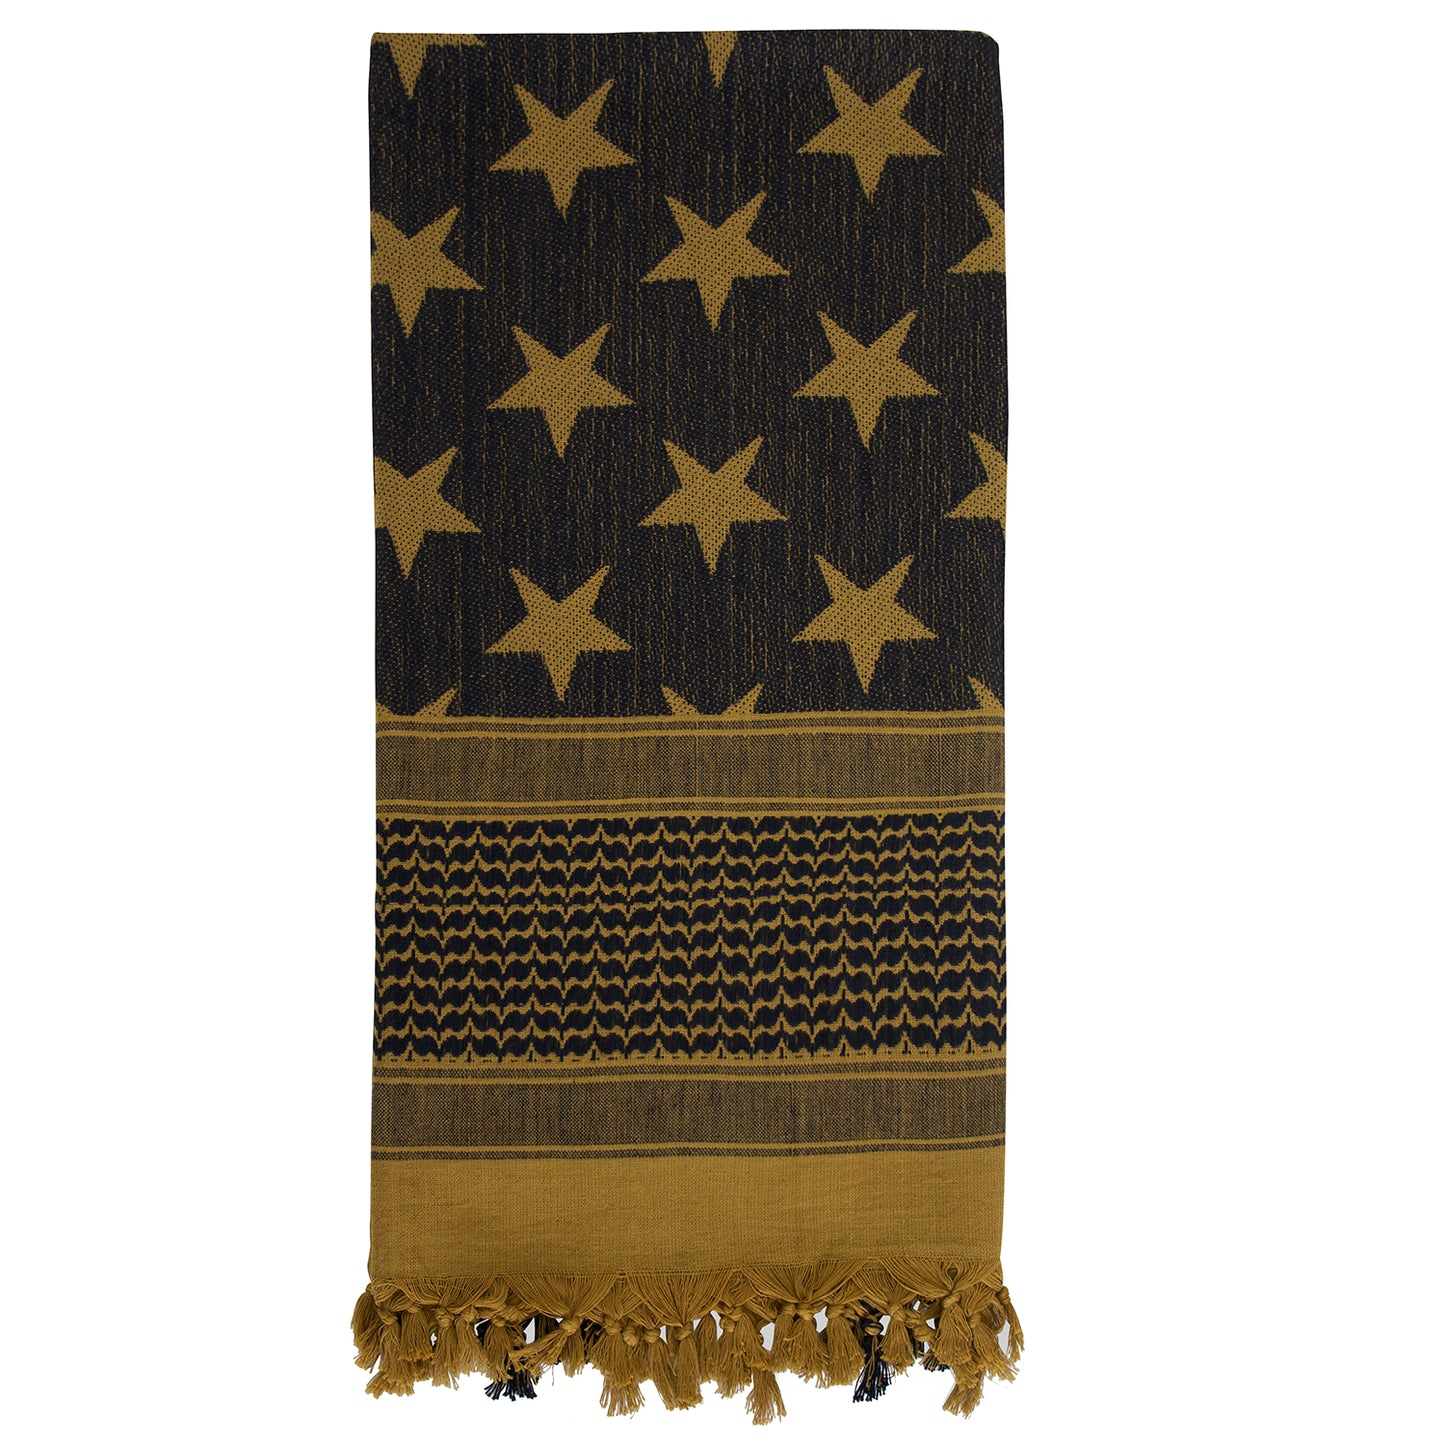 Stars and Stripes US Flag Shemagh Tactical Desert Keffiyeh Scarf